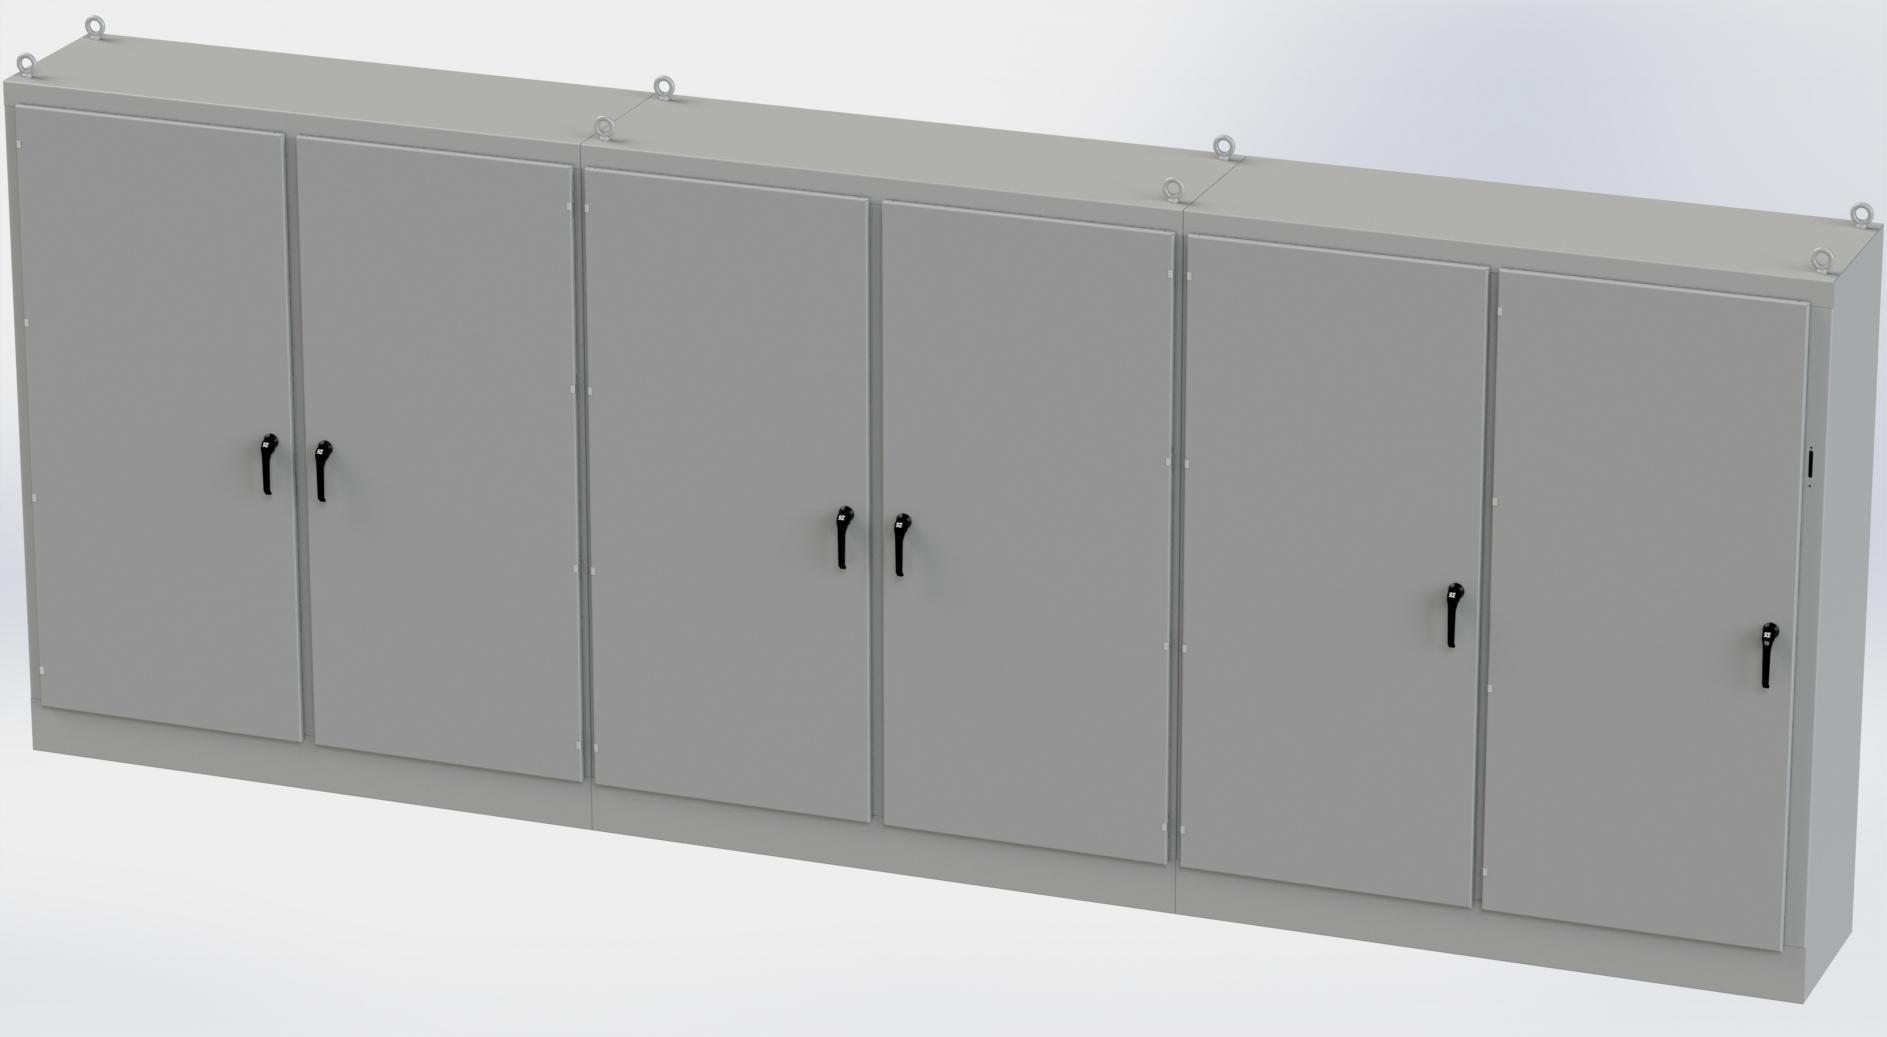 Saginaw Control SCE-90XM6EW24 6DR XM Enclosure, Height:90.00", Width:235.00", Depth:24.00", ANSI-61 gray powder coating inside and out. Sub-panels are powder coated white.